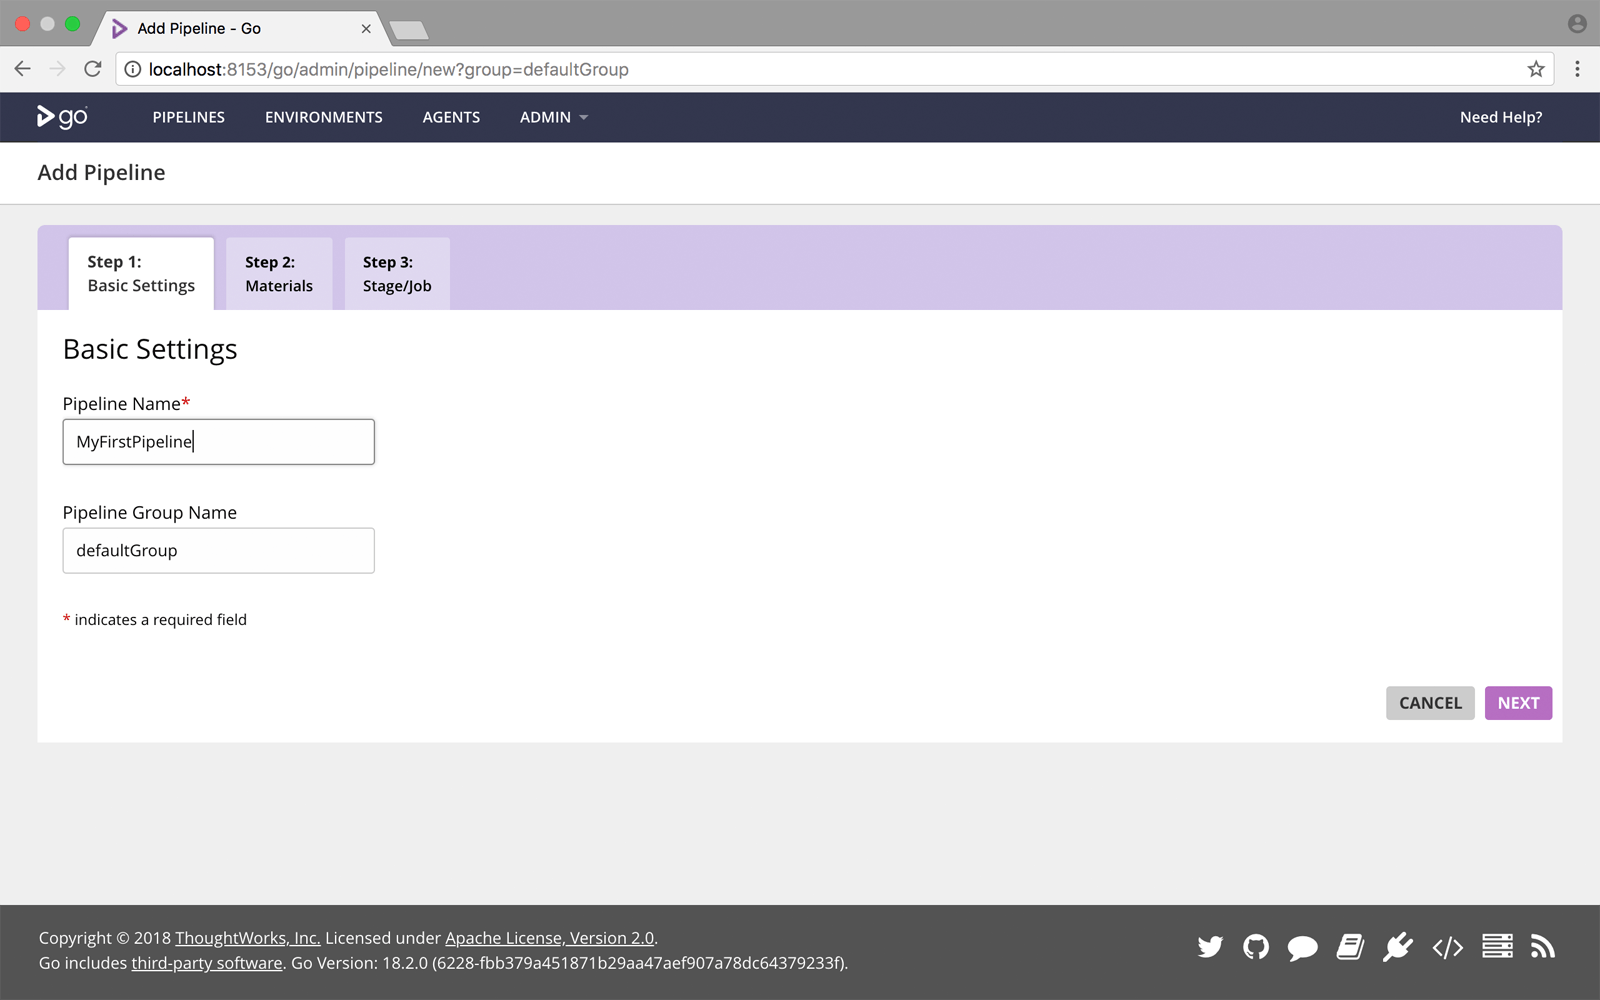 Step 1 - Screen to name your pipeline